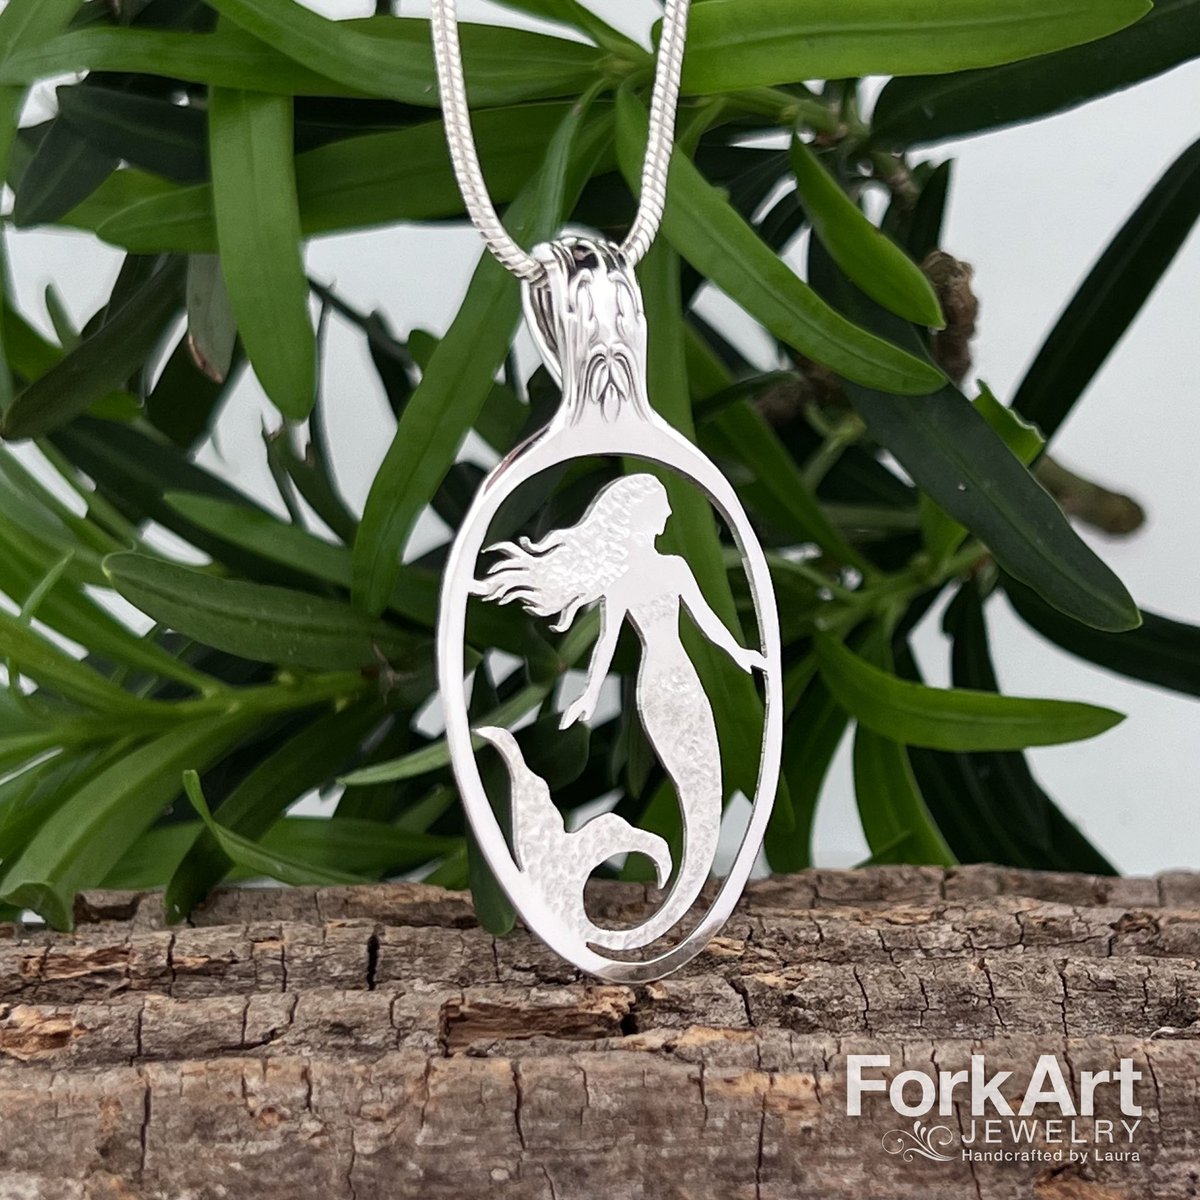 New mermaid pendant hand cut from a sterling silver teaspoon. Approximately 2”x1”. 
.
.
.
#mermaidpendant, #mermaidnecklace, #mermaidjewelry, #upcycled, #upcycledjewelry, #spoonjewelry